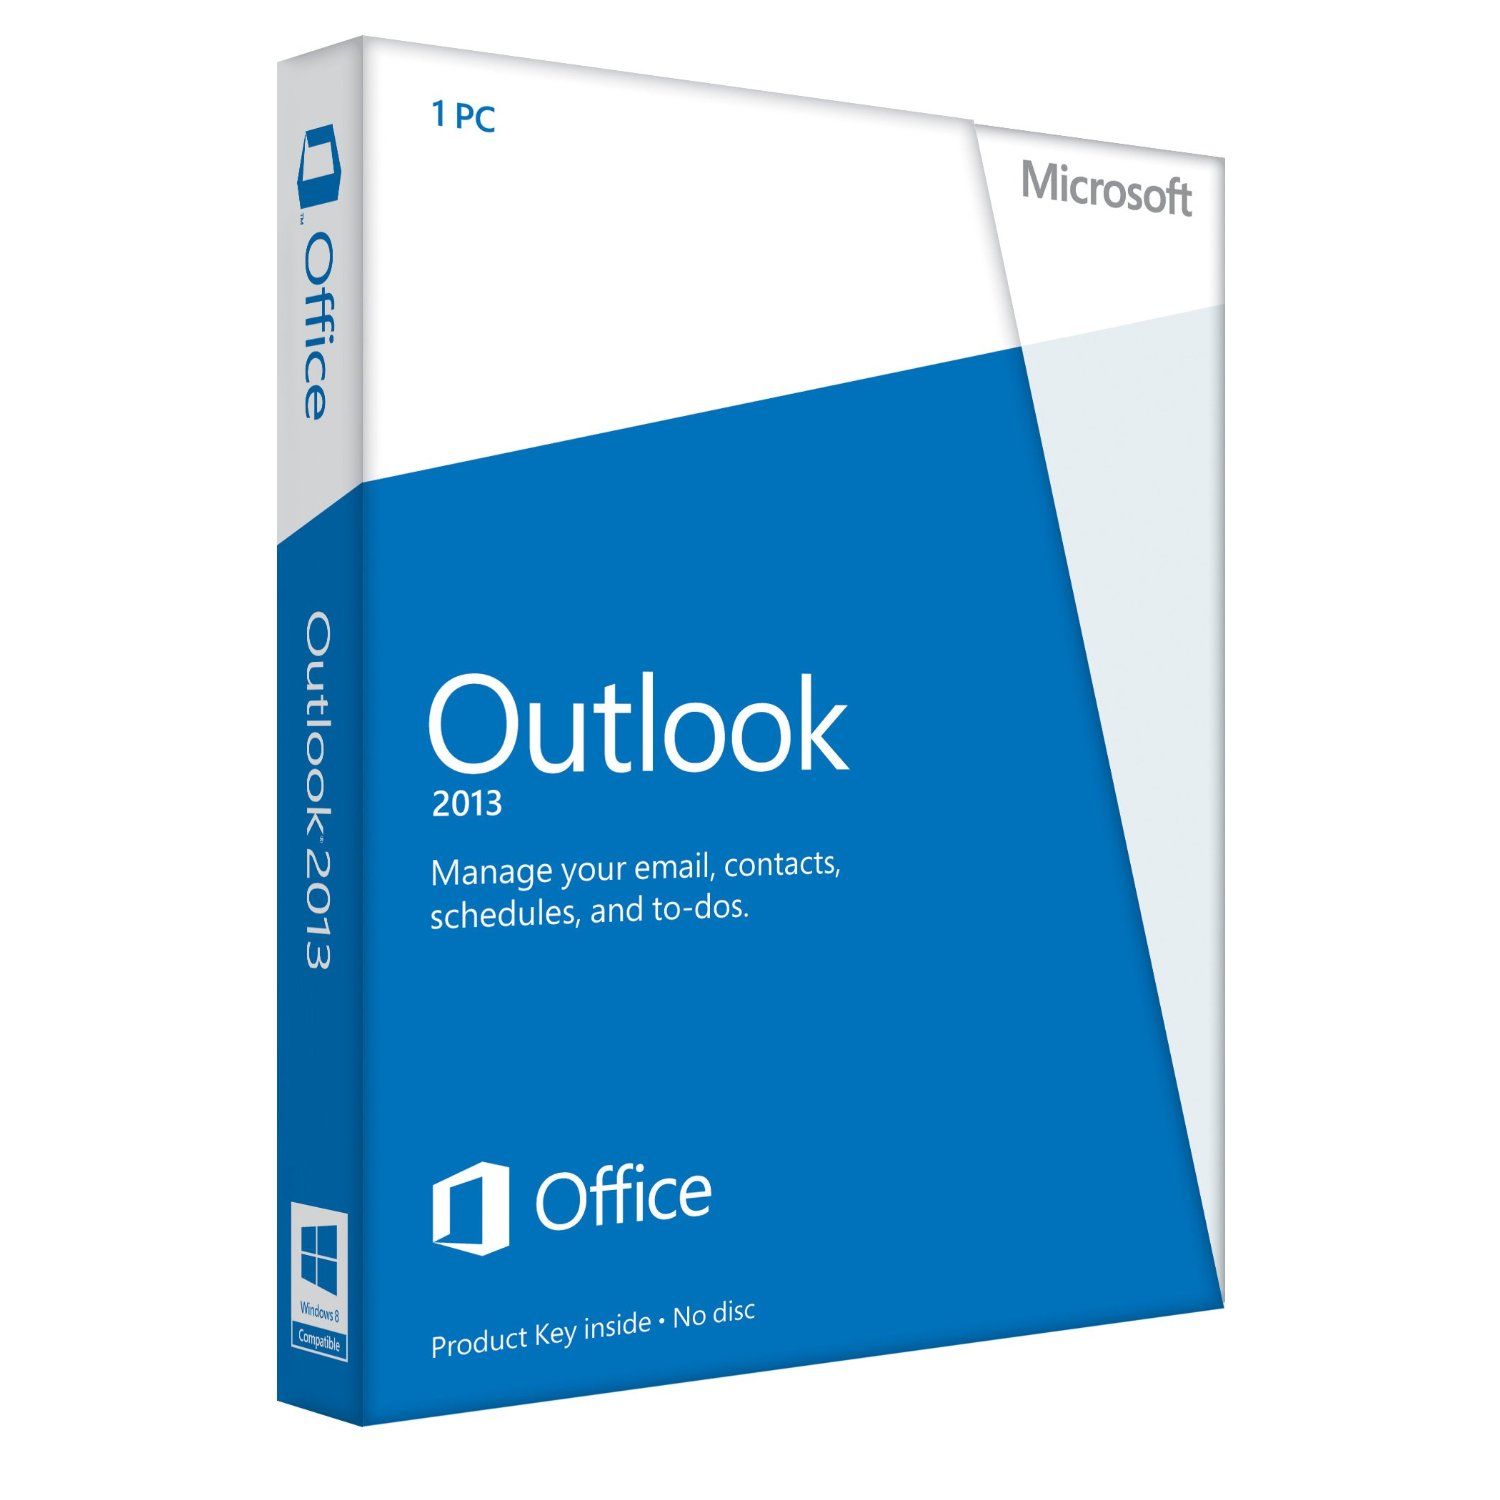 Microsoft Office 2013 For Mac Crack Free Download